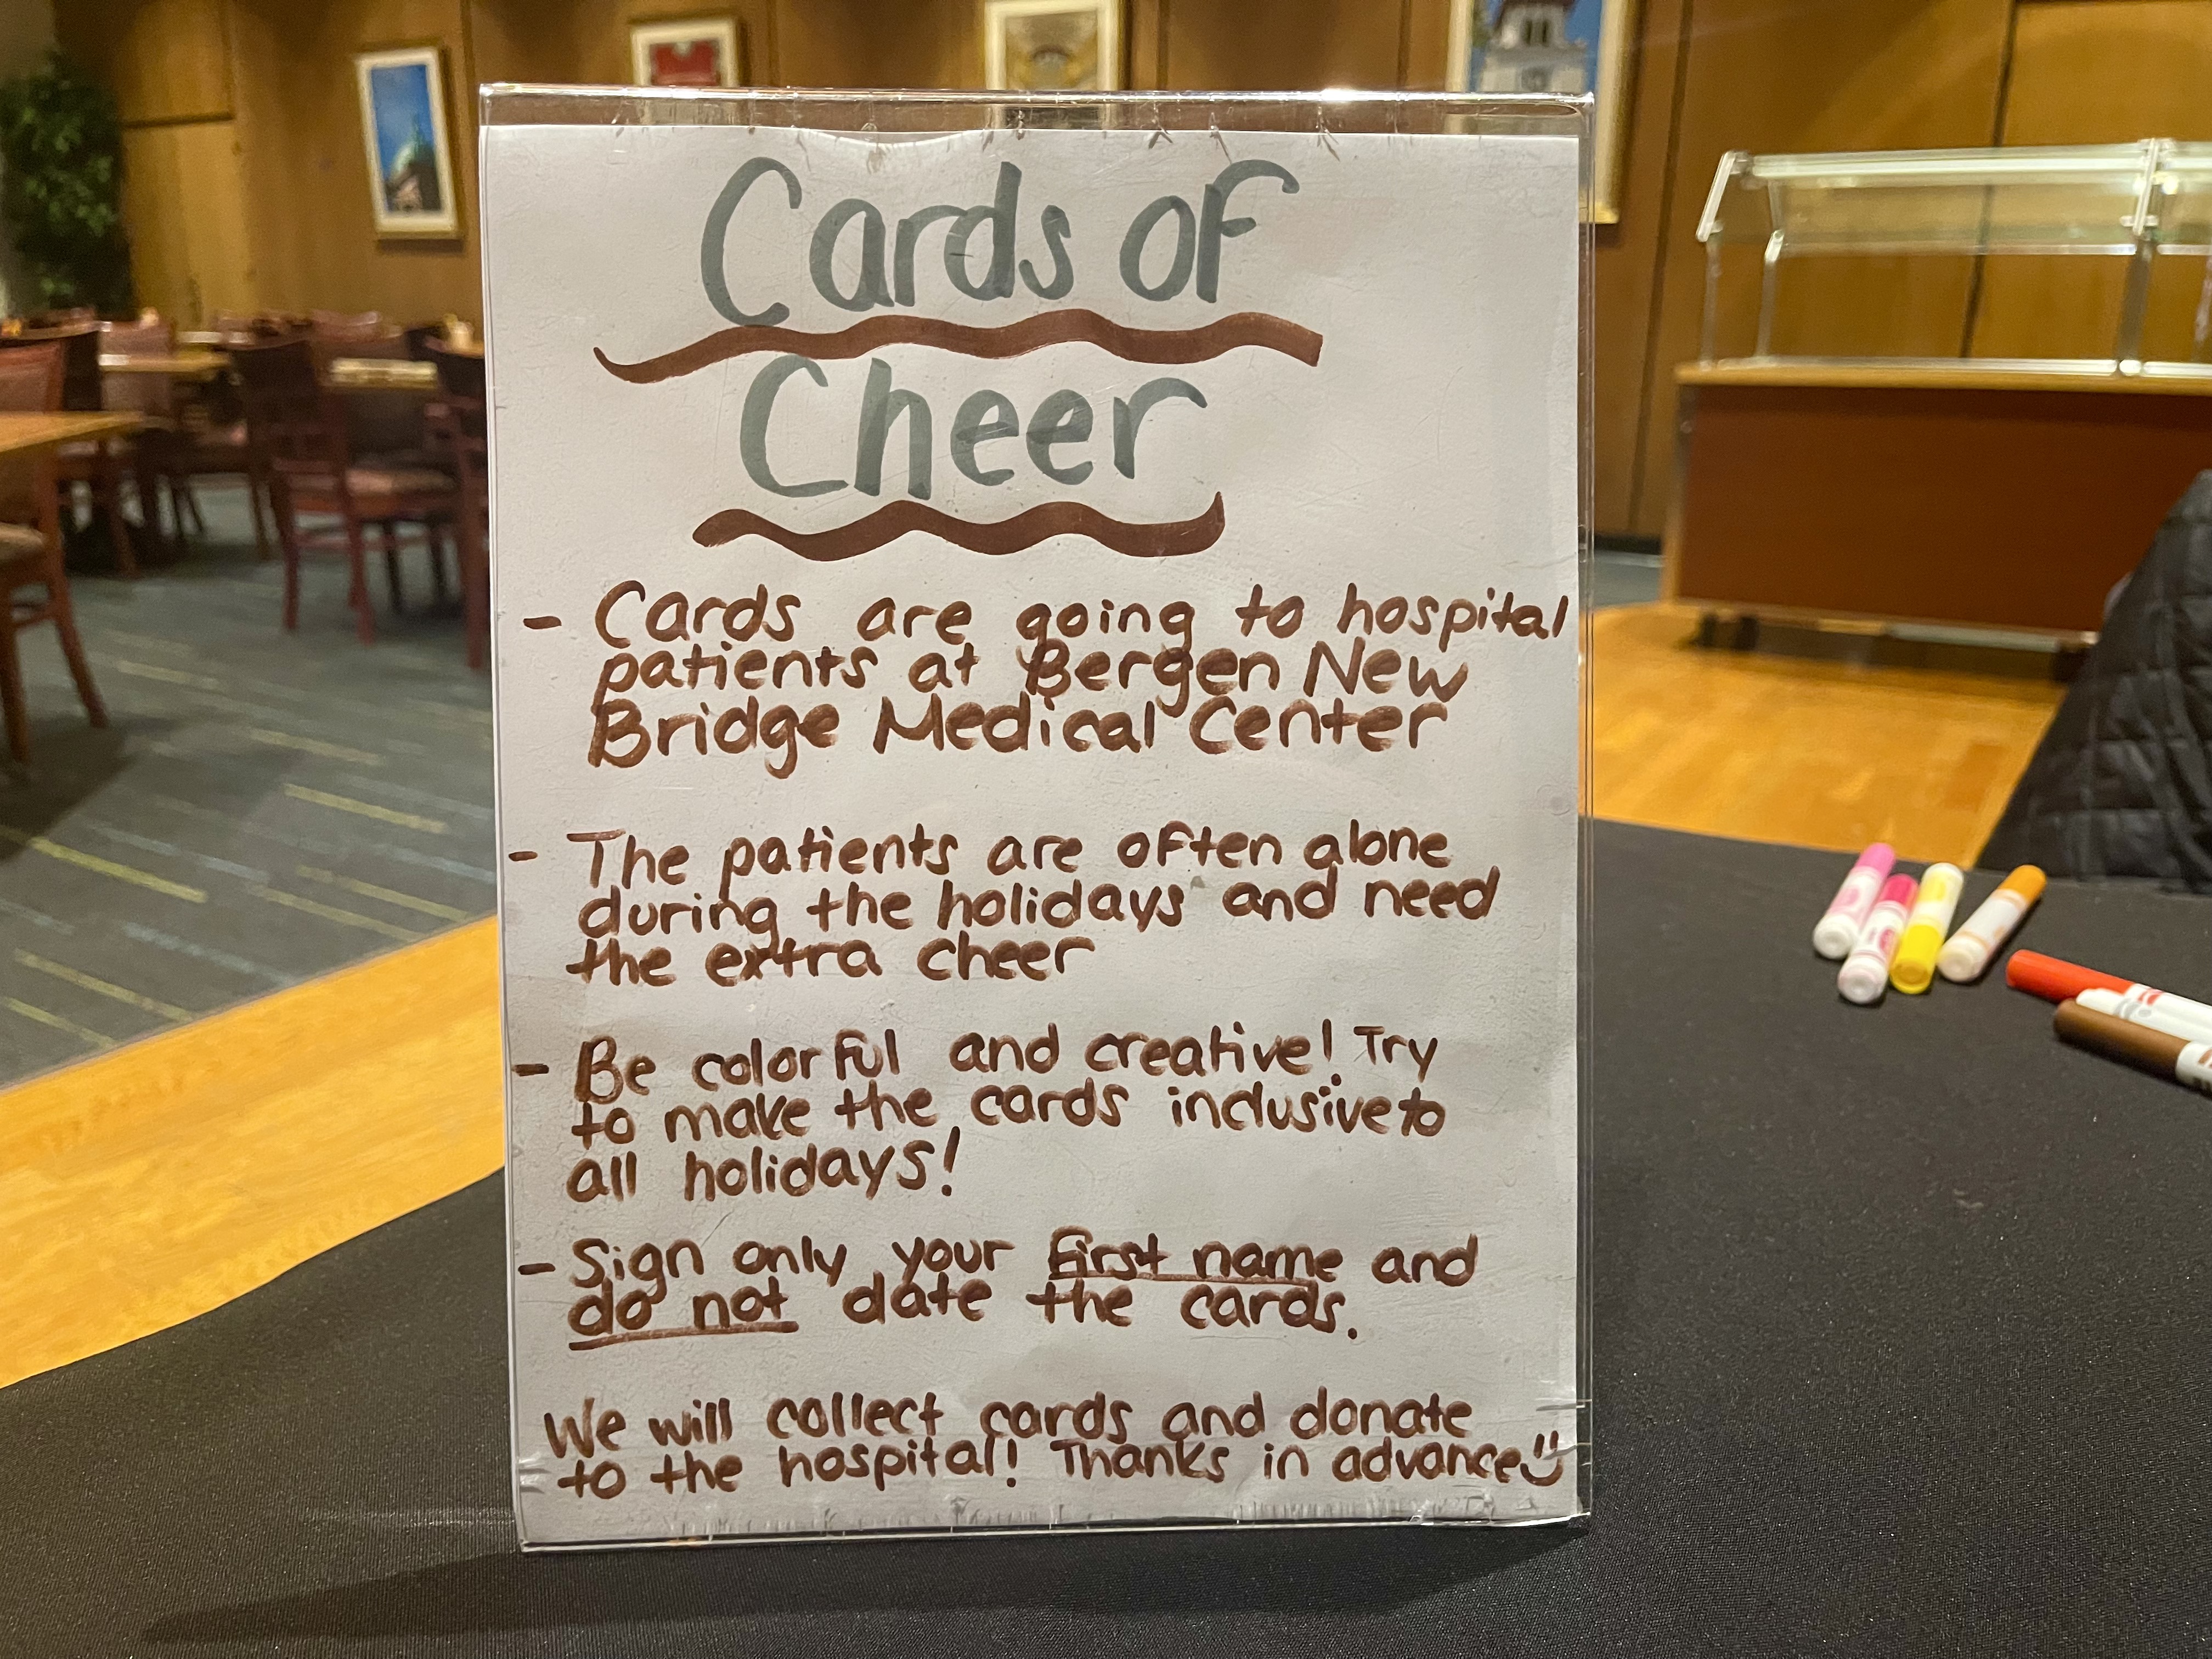 Students created holiday cards to cheer up cancer patients who are often alone during the holidays